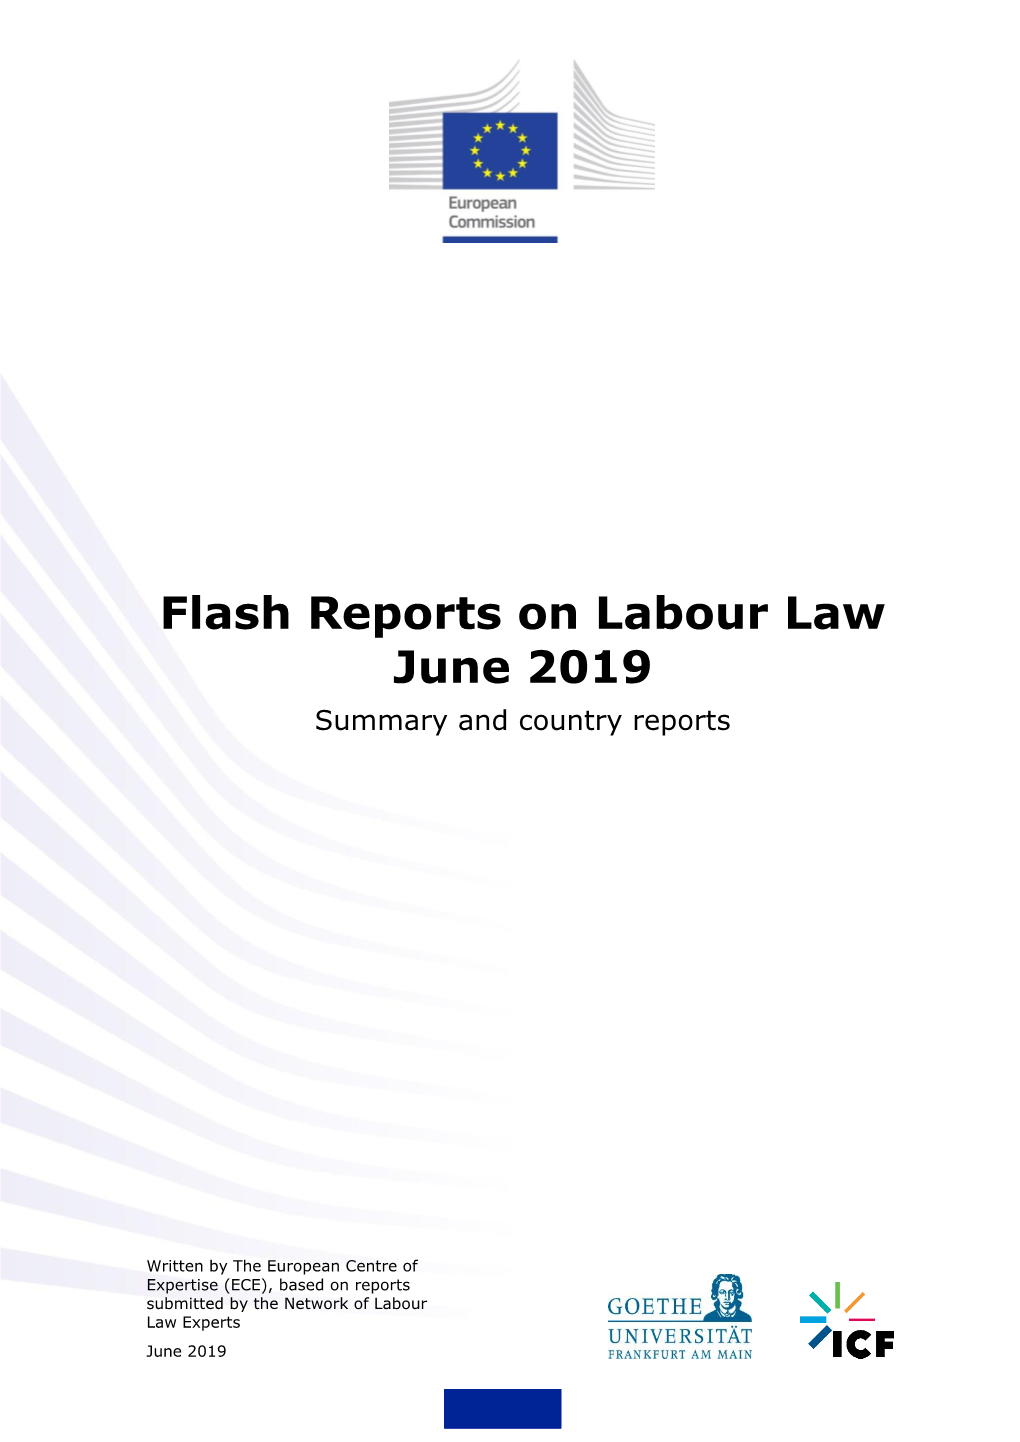 Flash Reports on Labour Law June 2019 Summary and Country Reports